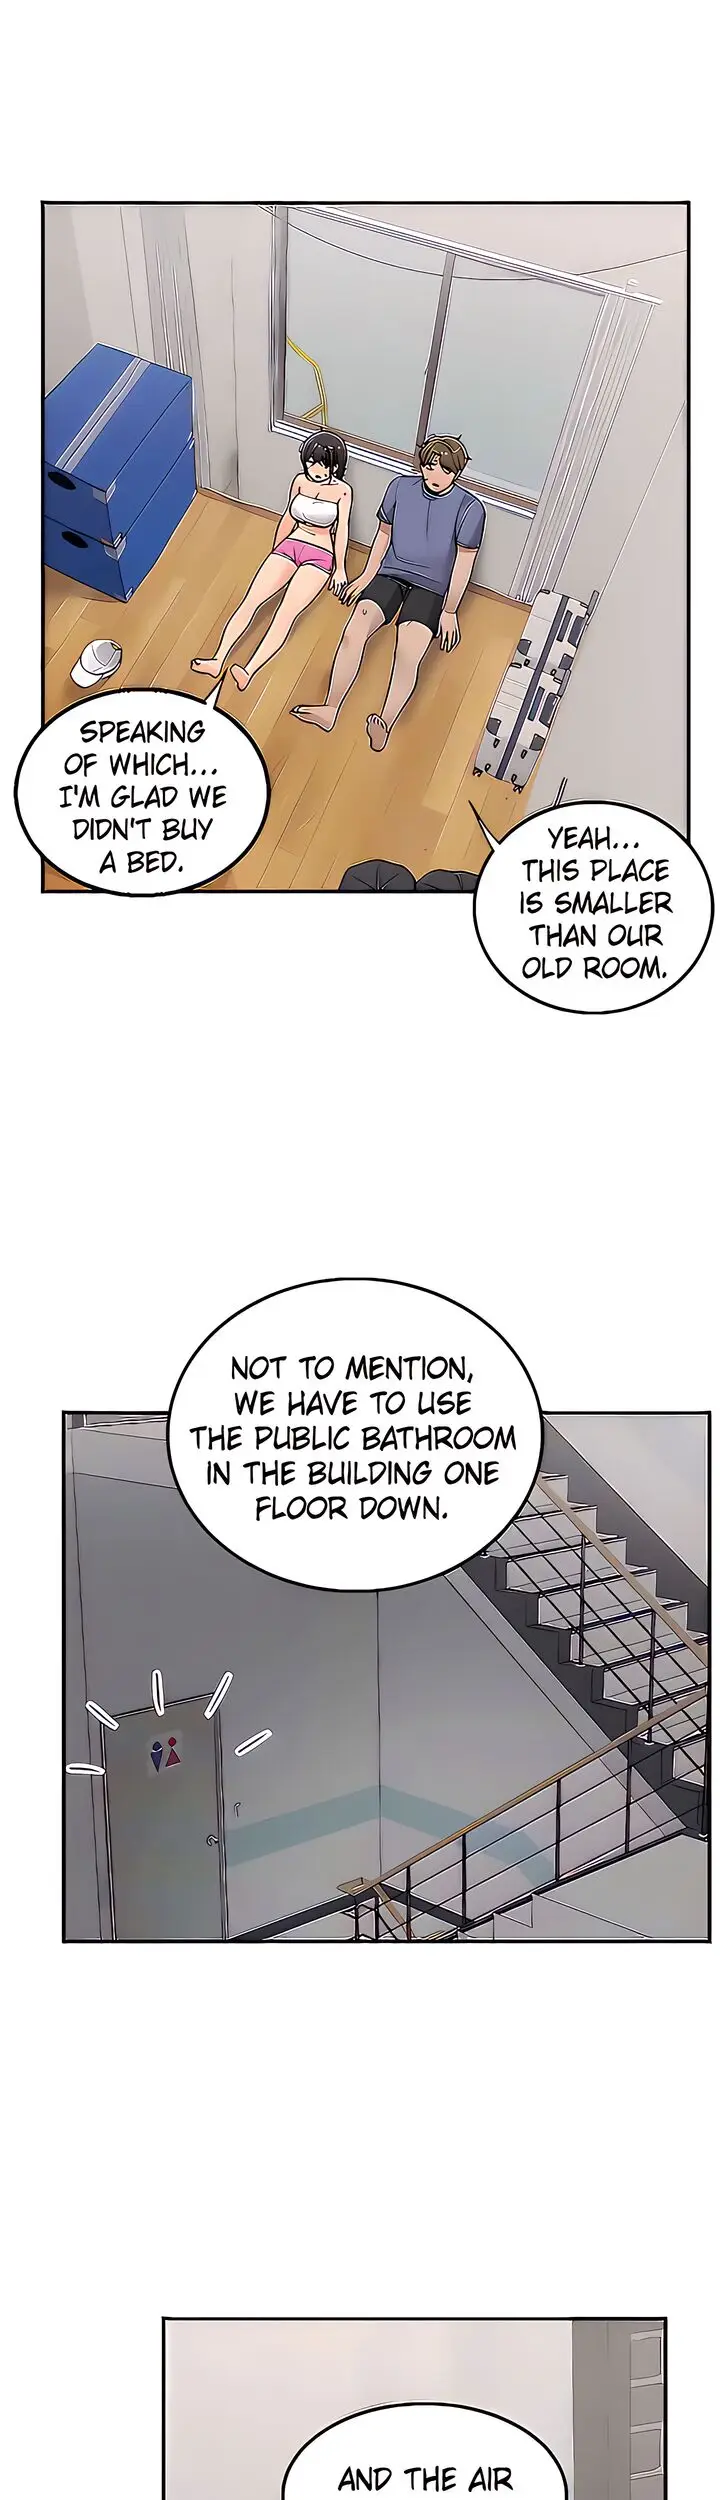 delivery-man-chap-26-17